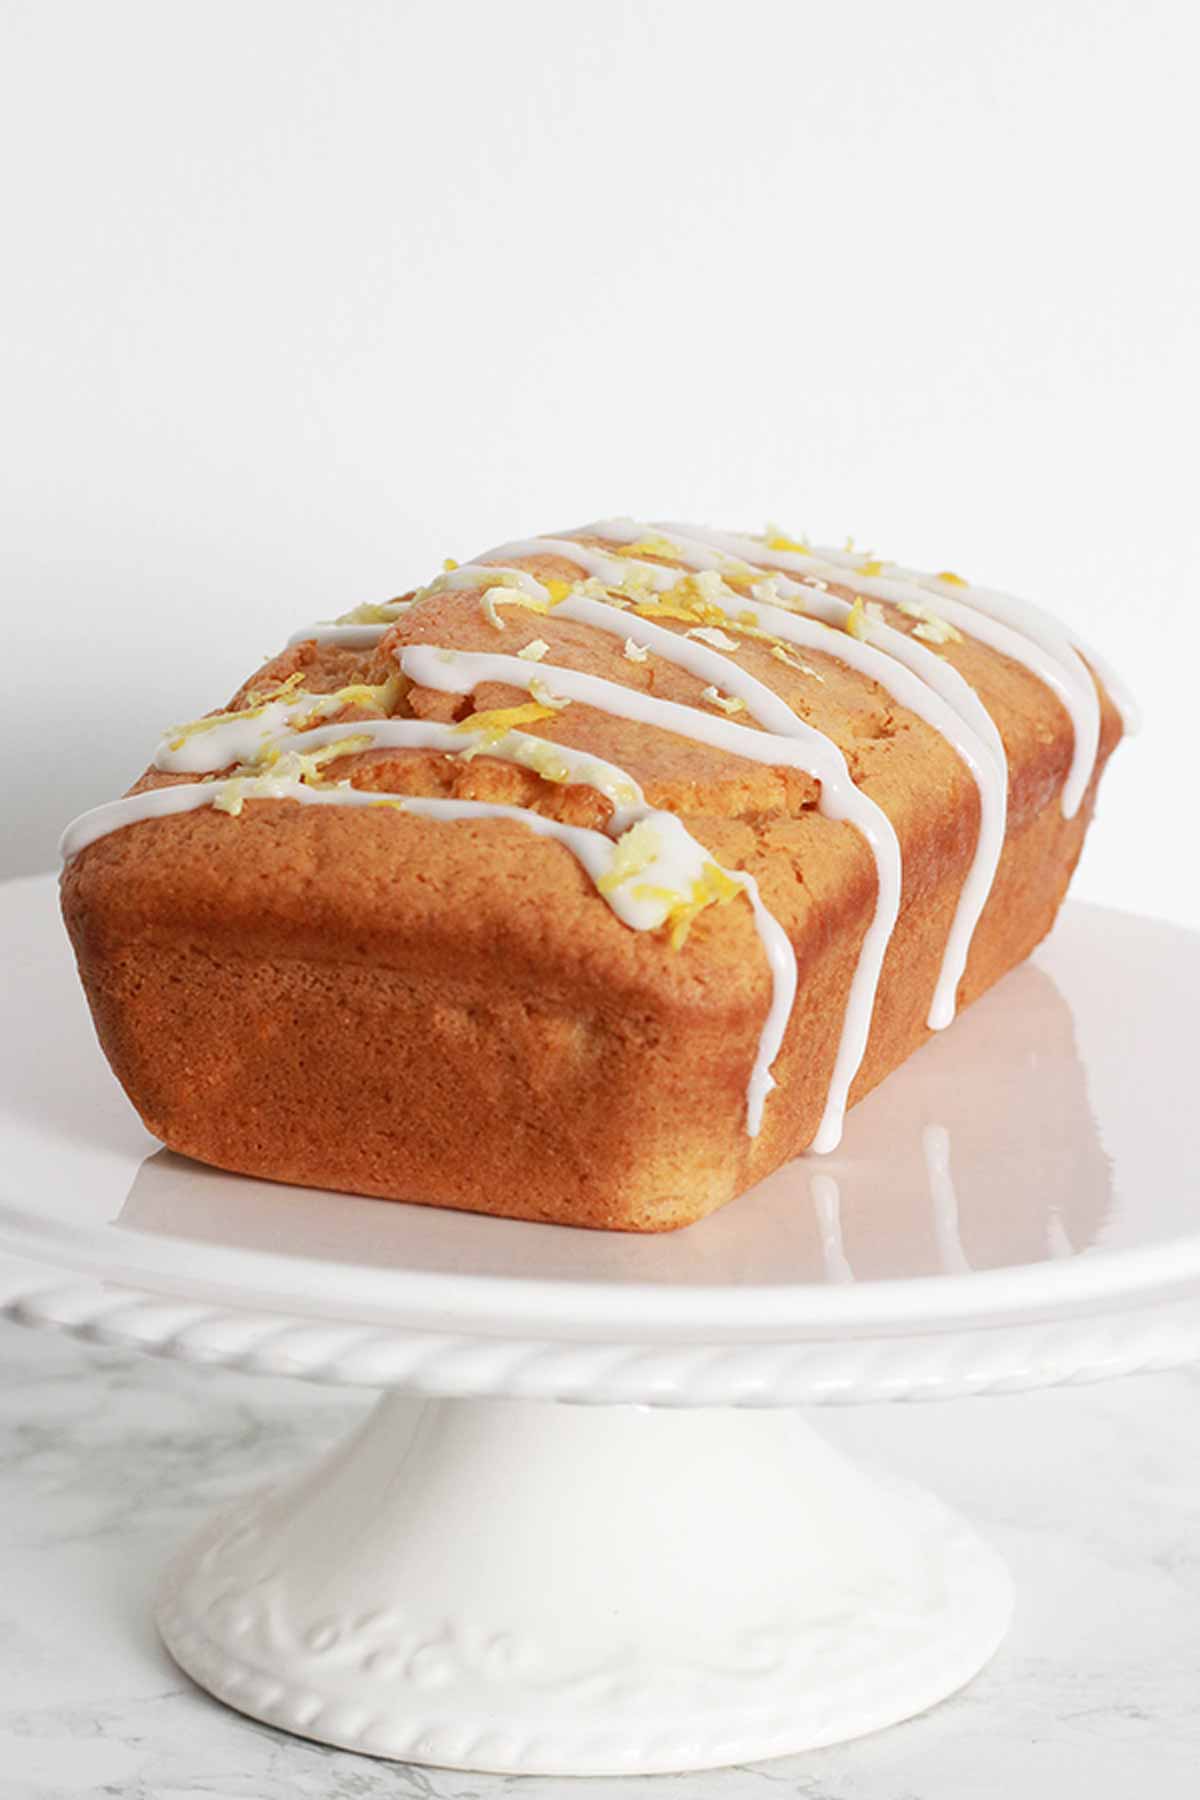 Vegan Lemon Drizzle Loaf With Icing Drizzled On Top